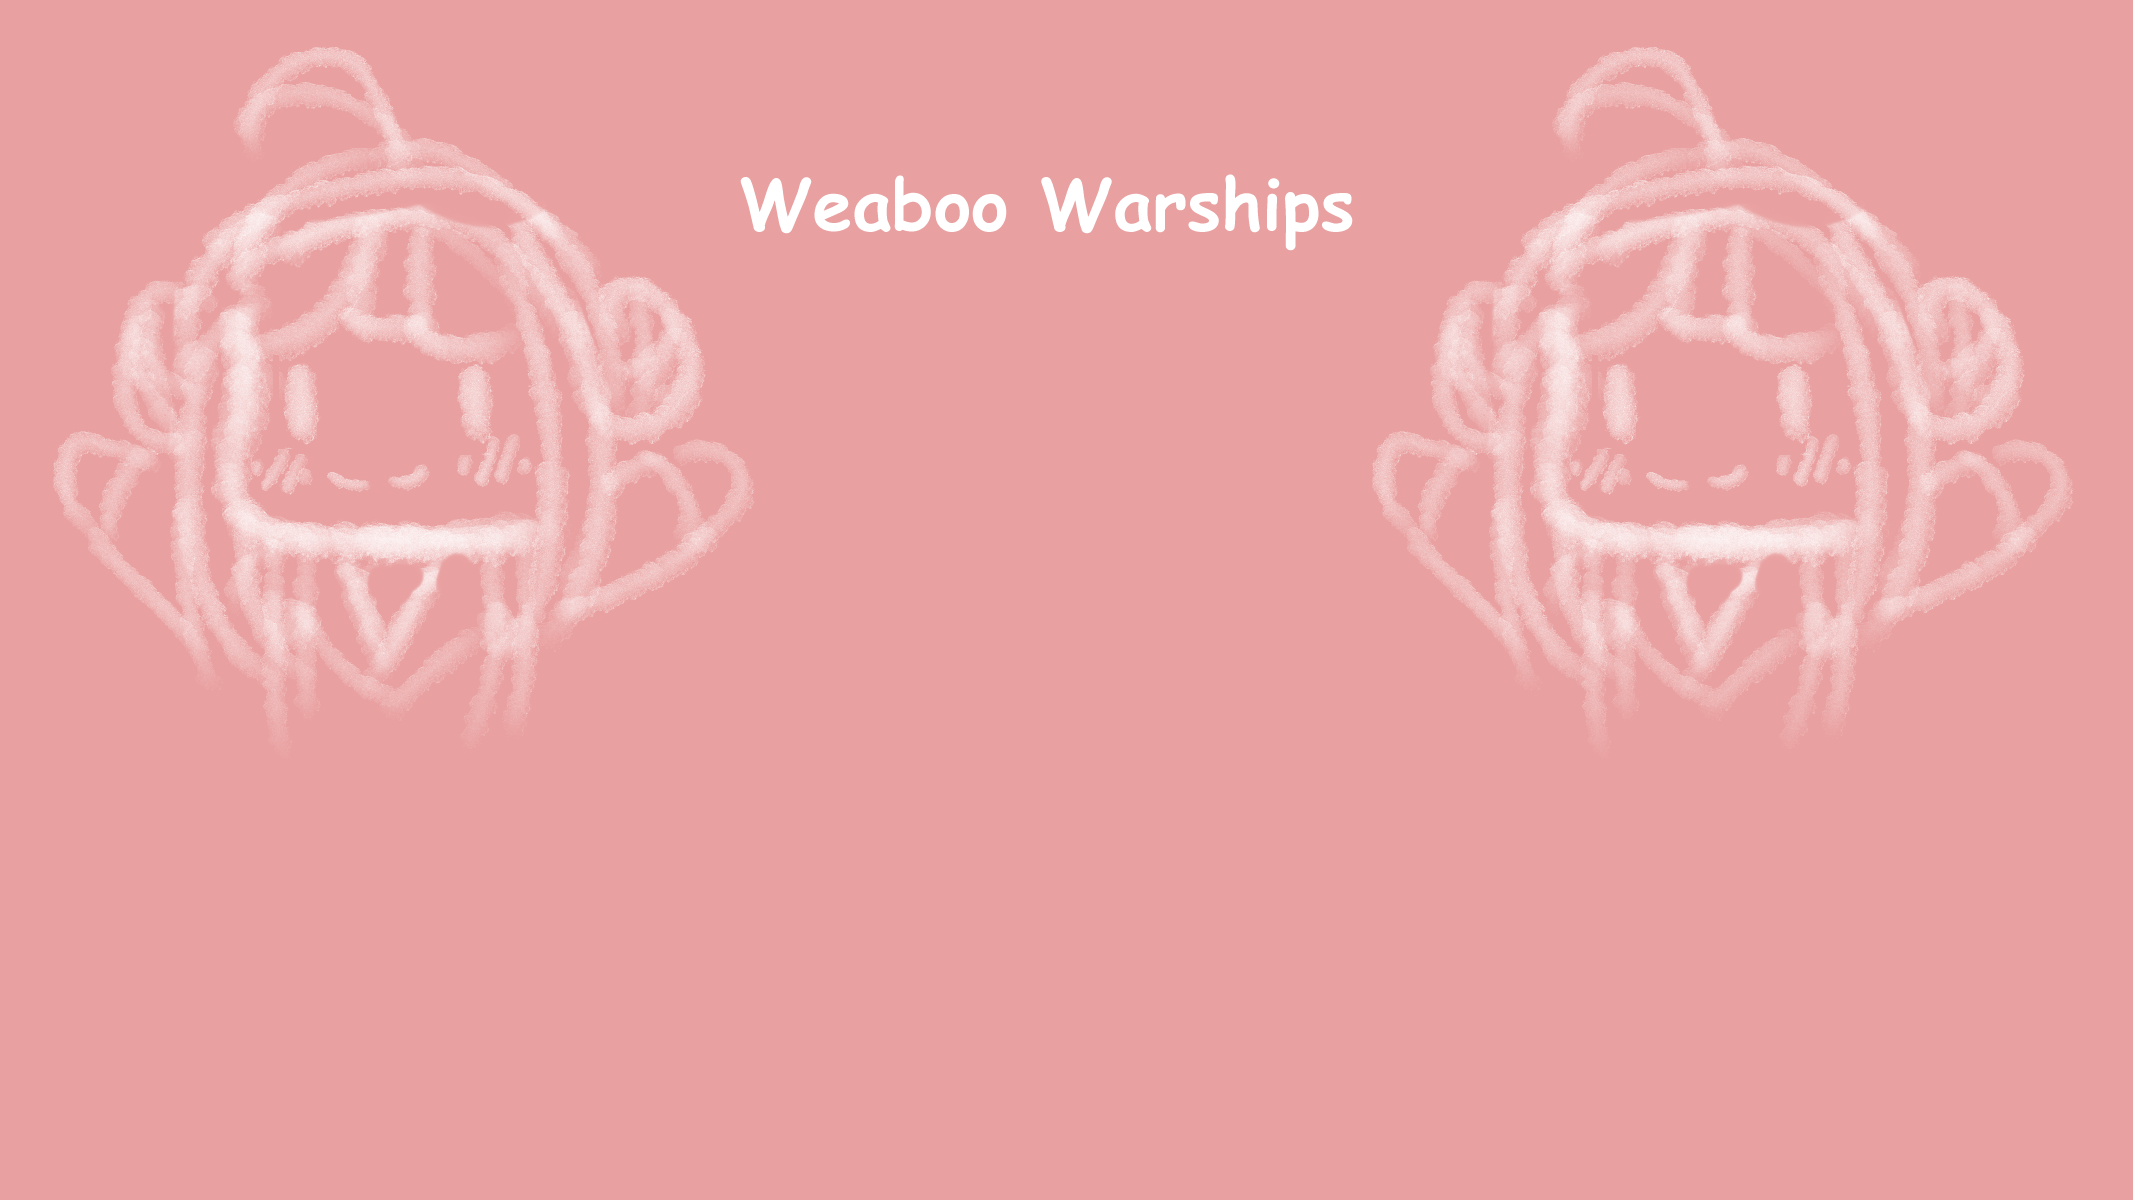 Weaboo Warships by donuthead